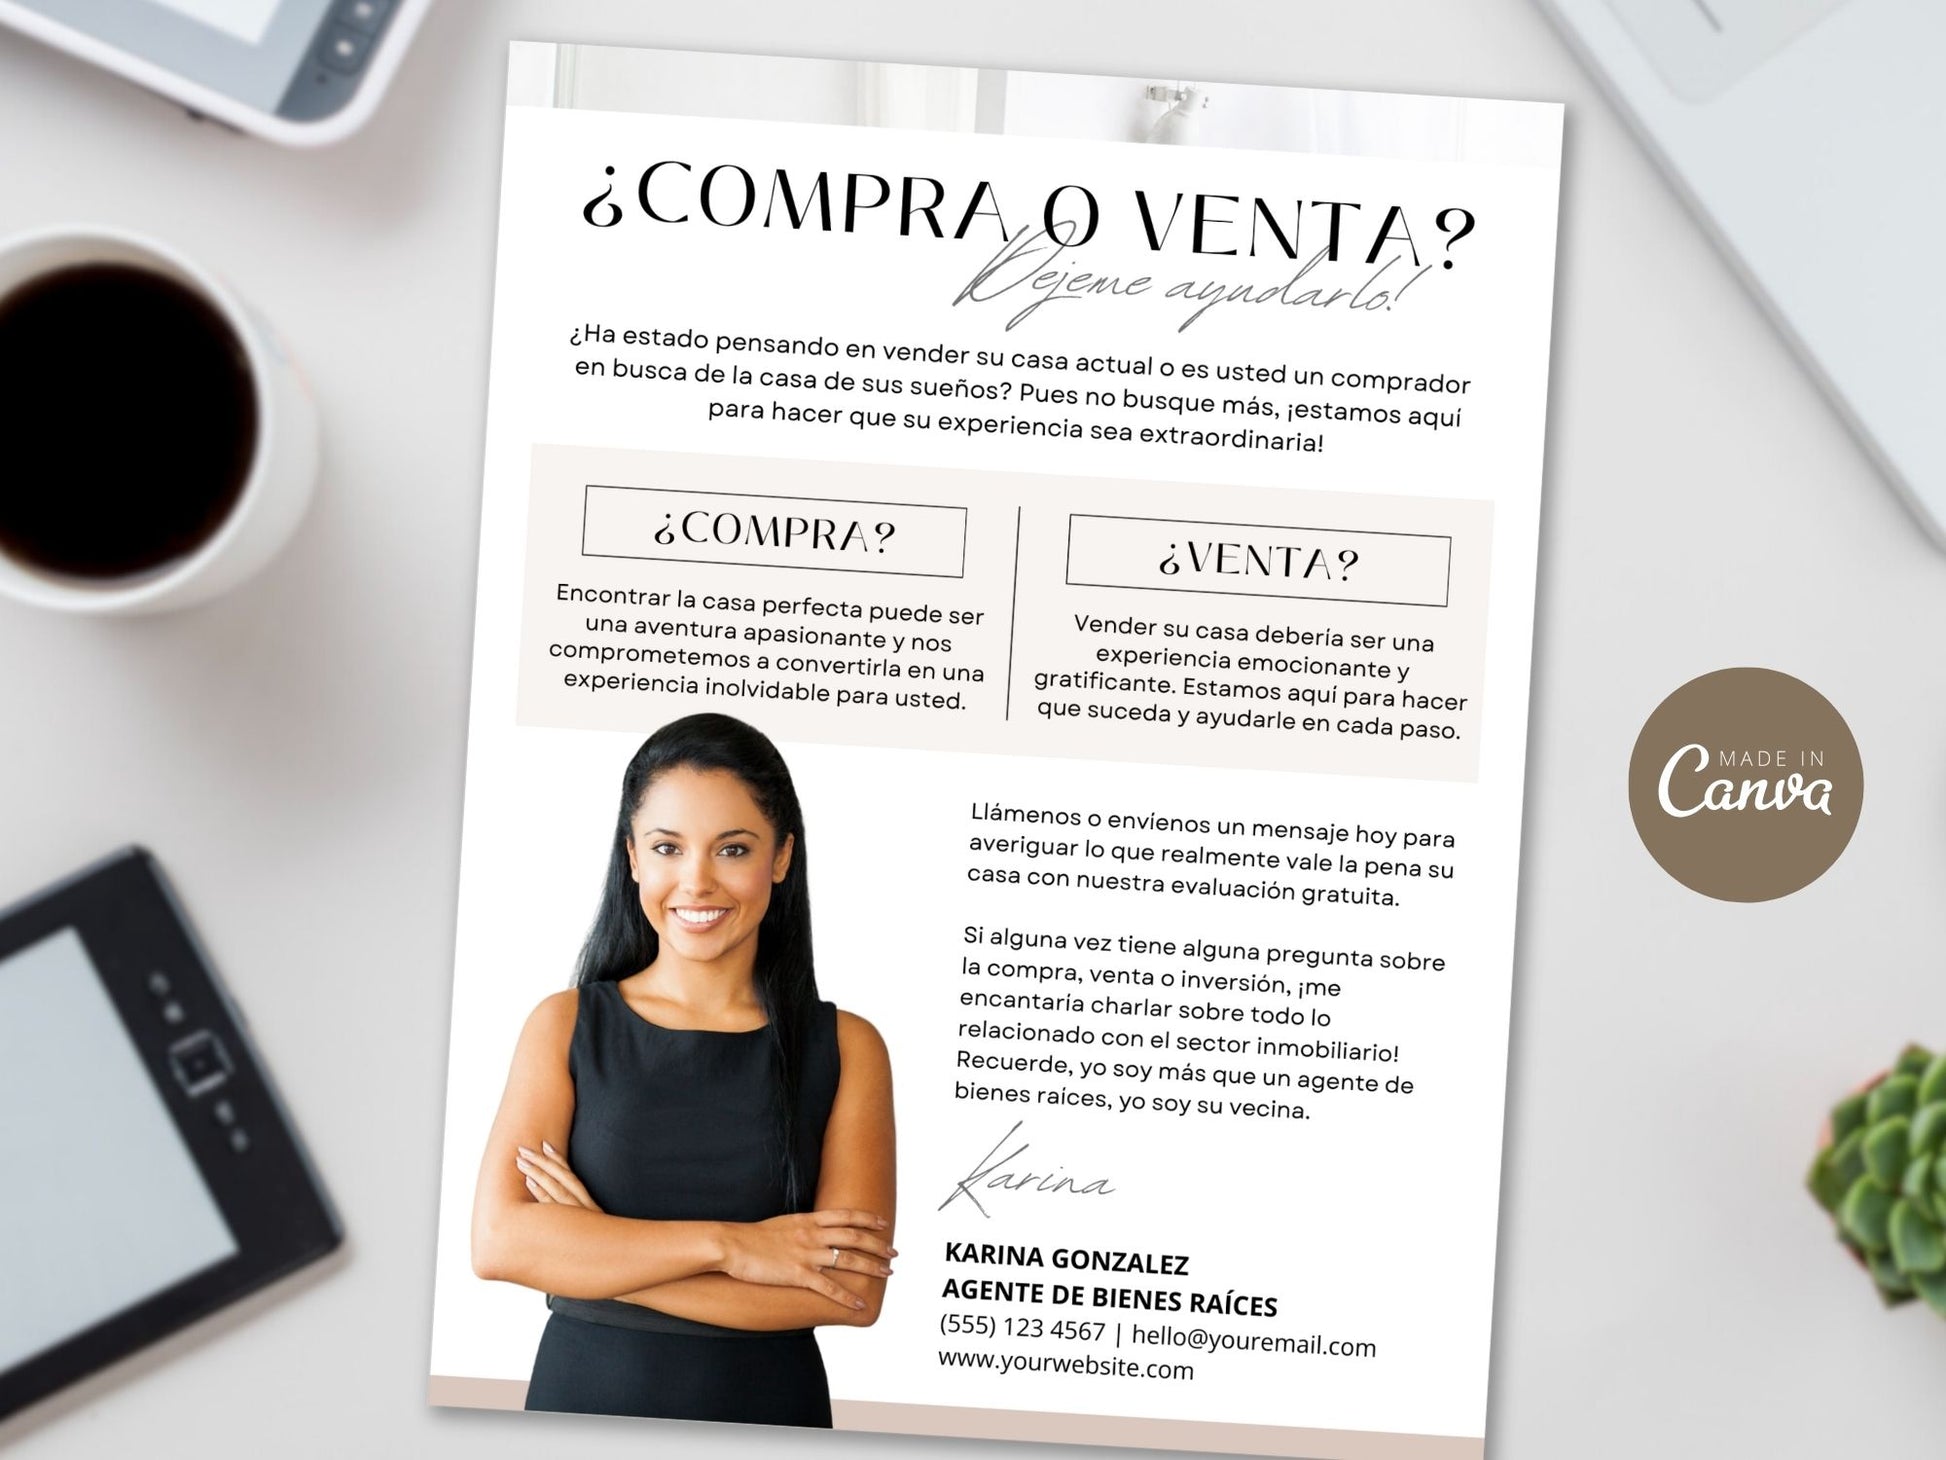 Spanish Buying or Selling Real Estate Letter Vol. 02 - Instill confidence when buying or selling properties with a personalized introduction, clear guidance, and professional real estate services